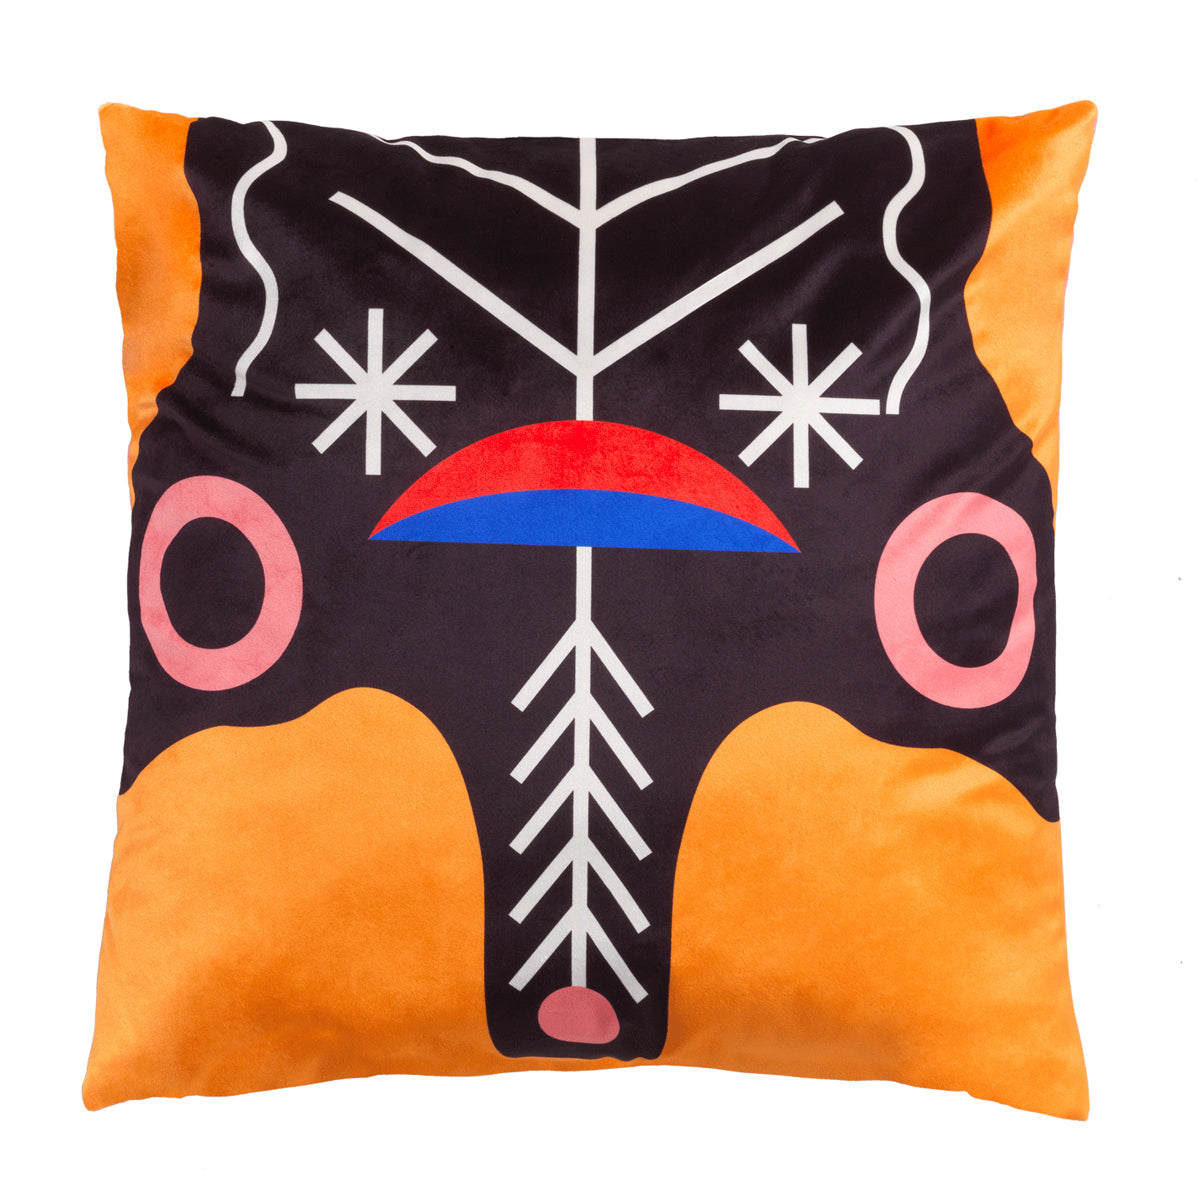 Oggian Kinotto Cushion Cover by Marco Oggian - Qeeboo